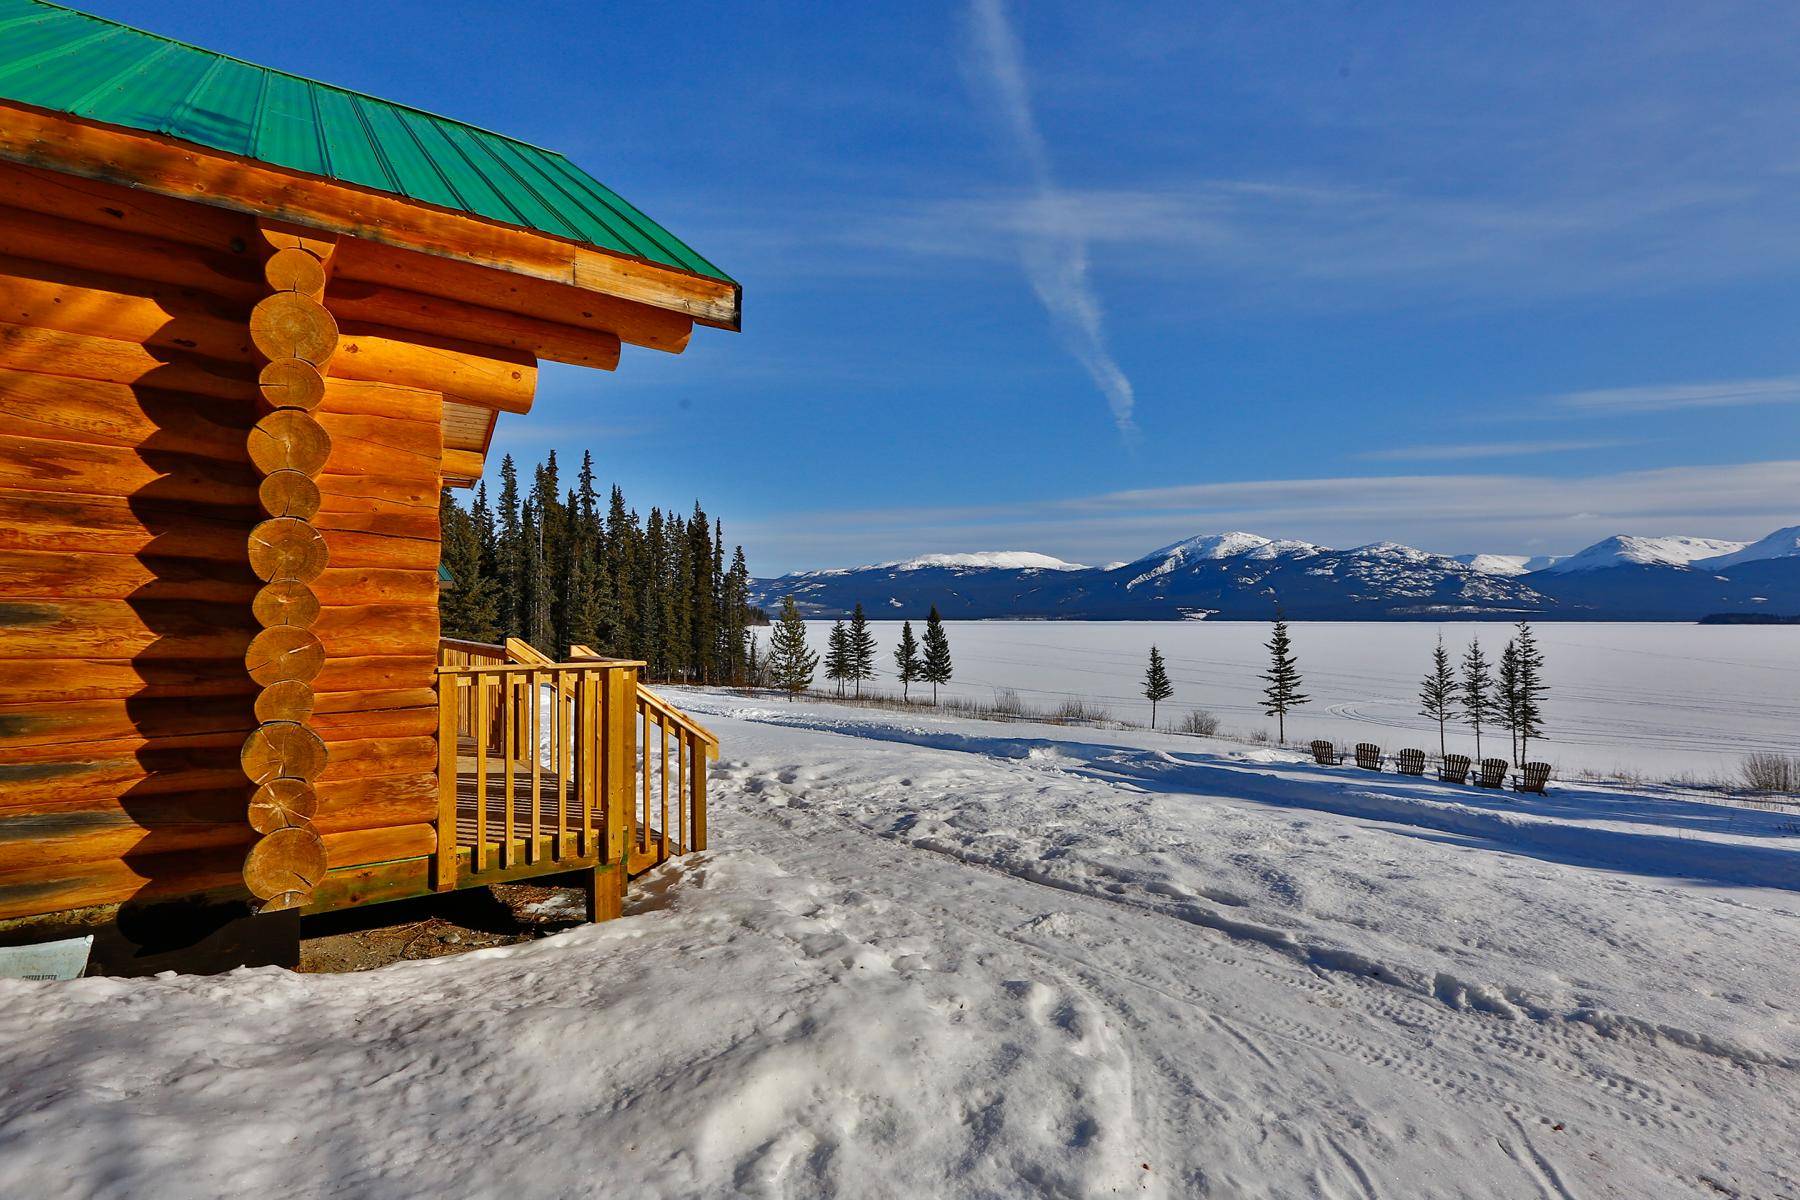 View along a cabin on the frozen lake and mountains in deep winter